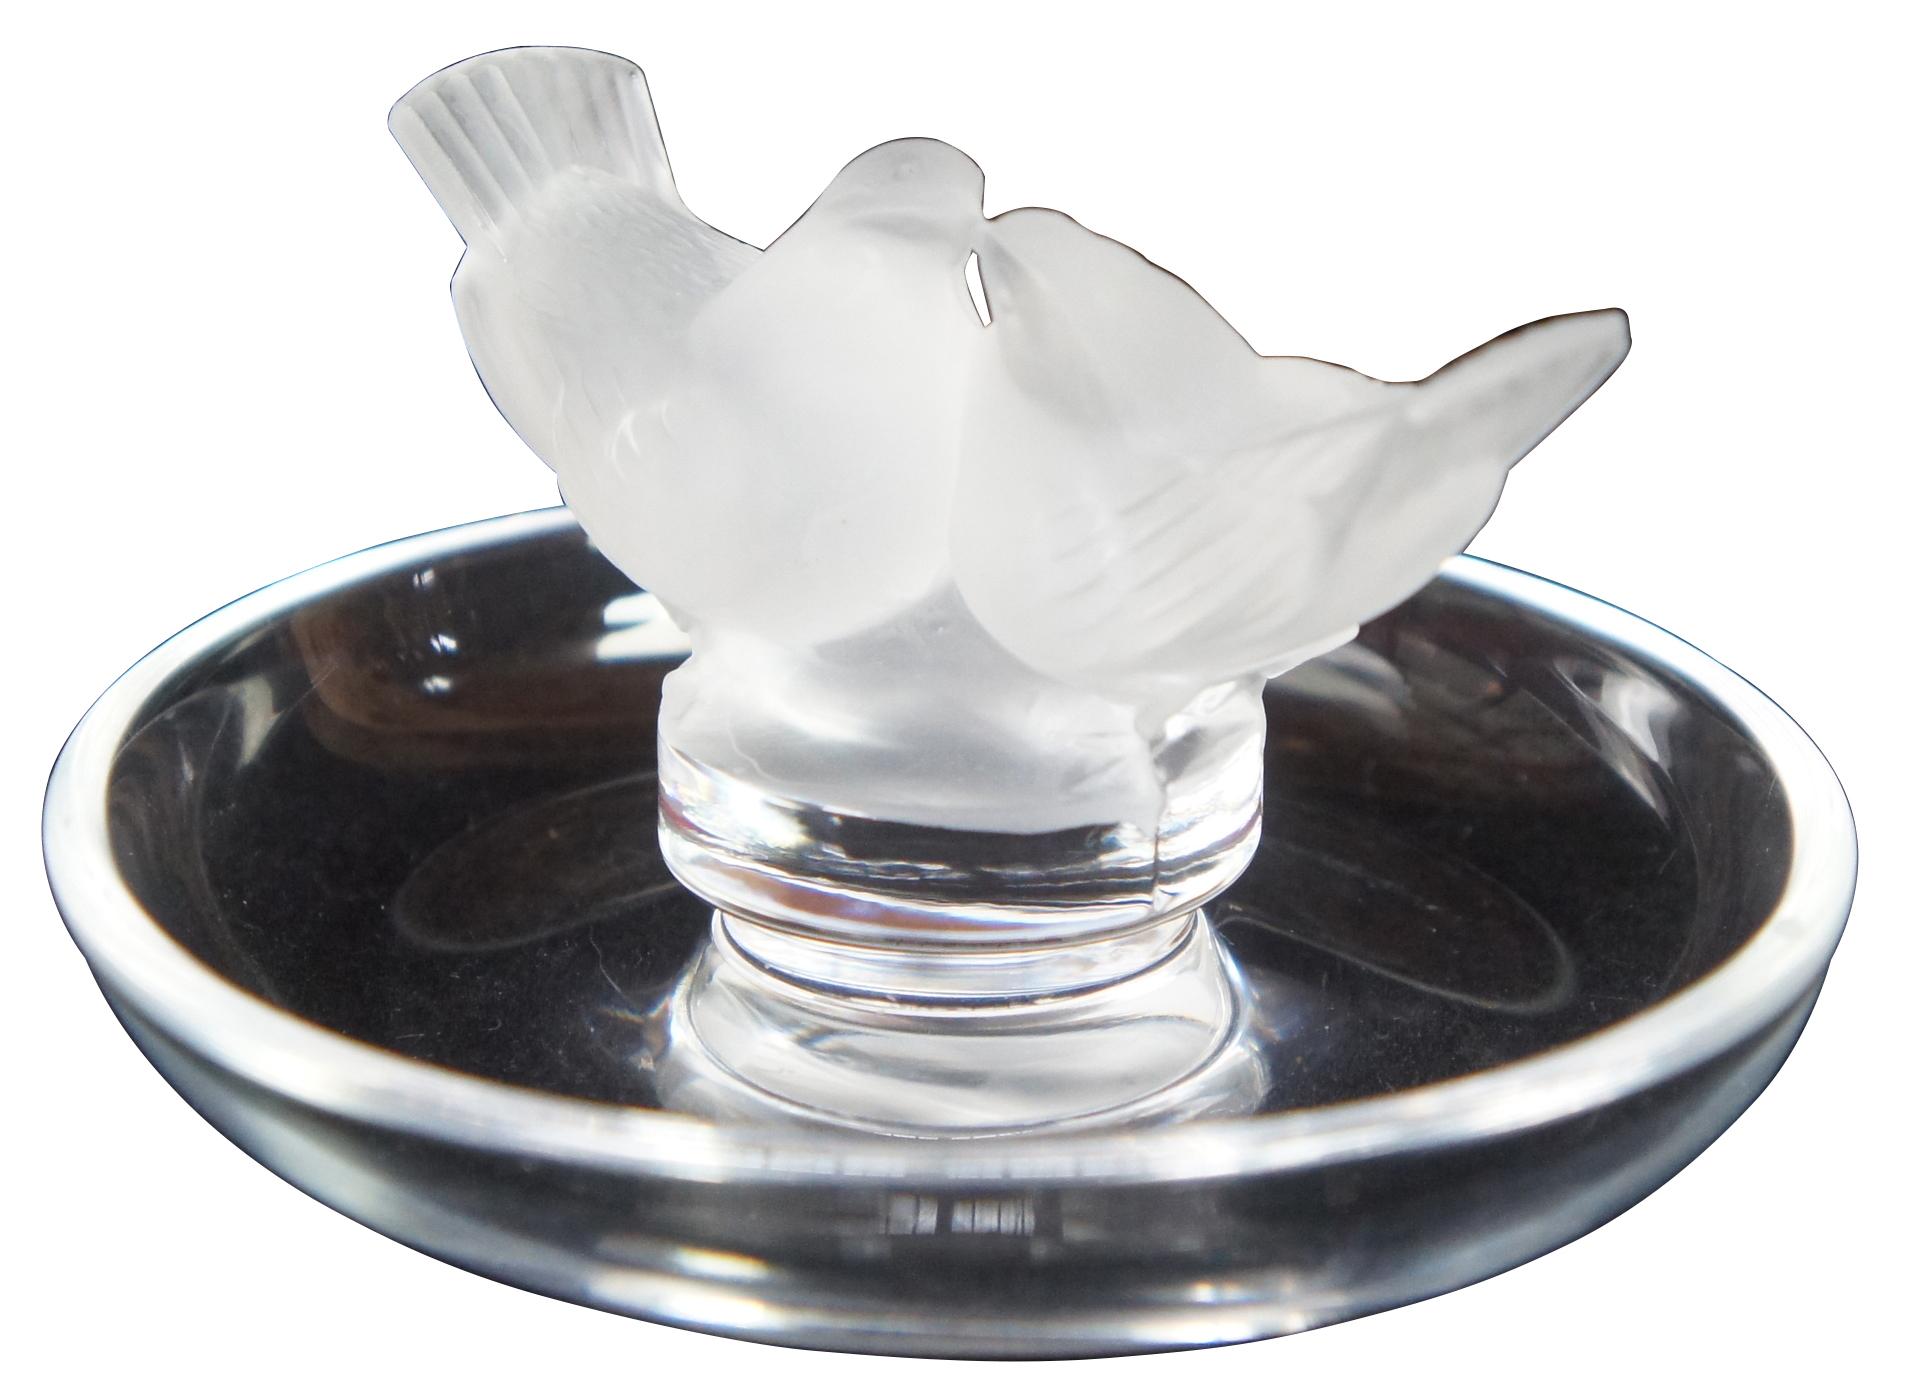 Vintage Lalique French crystal ring holder dish with a frosted glass lovebirds centerpiece. Measure: 4